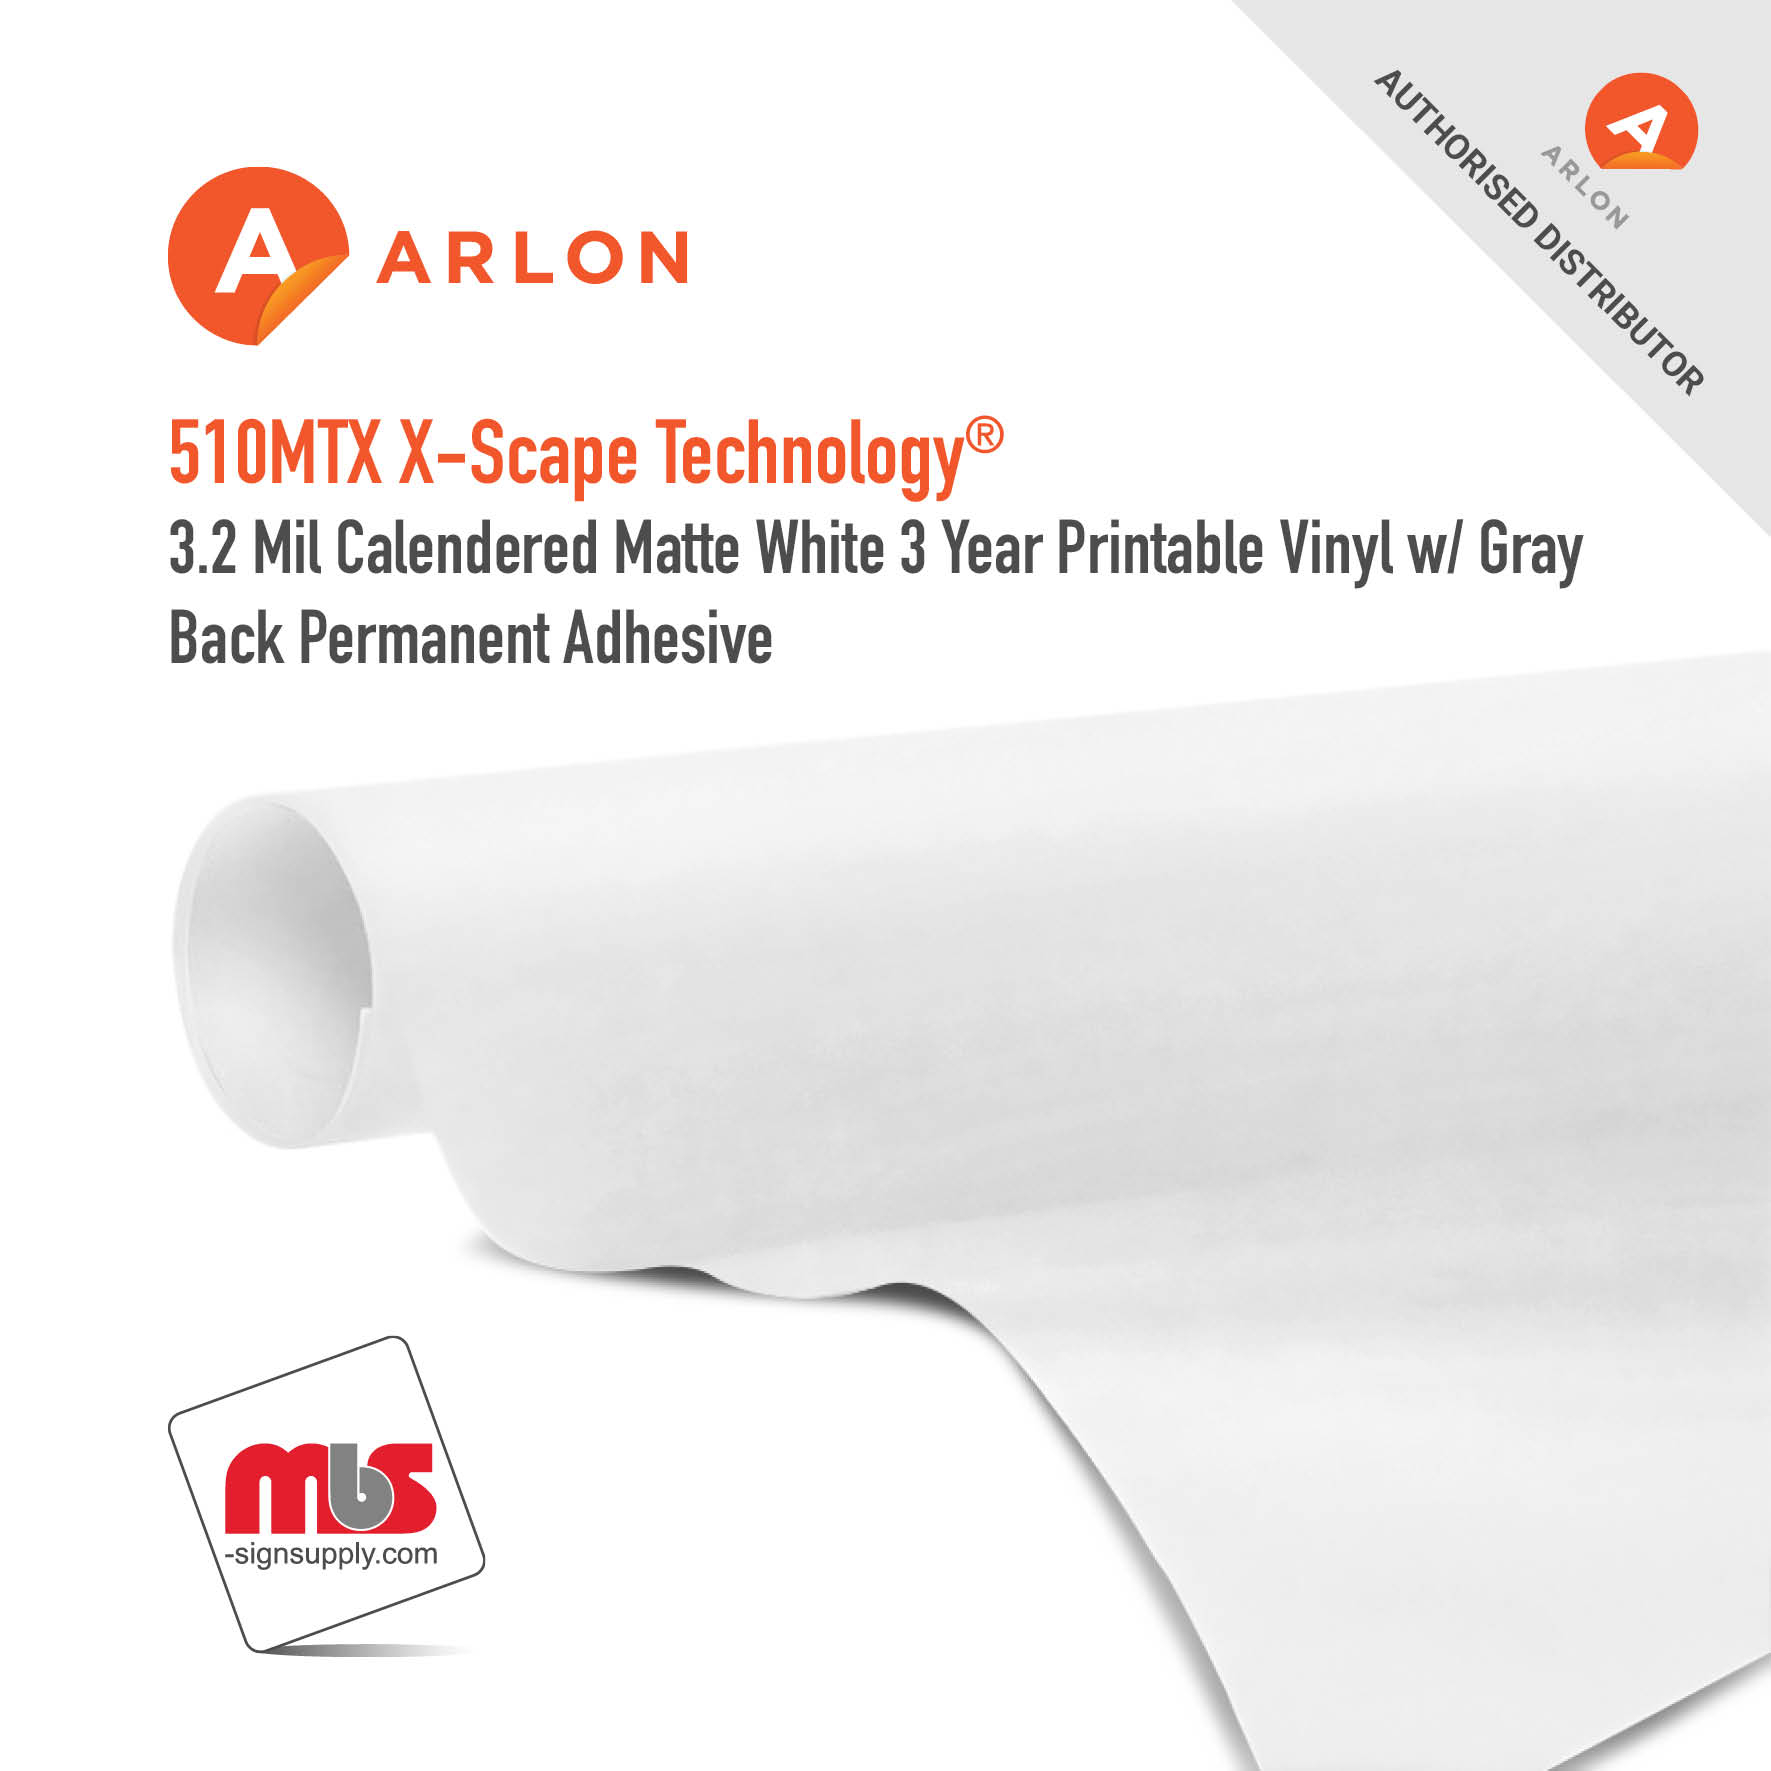 54'' x 50 Yard Roll - Arlon DPF 510MTX X-Scape Technology® 3.2 Mil Calendered Matte White 3 Year Printable Vinyl w/ Gray Back Permanent Adhesive